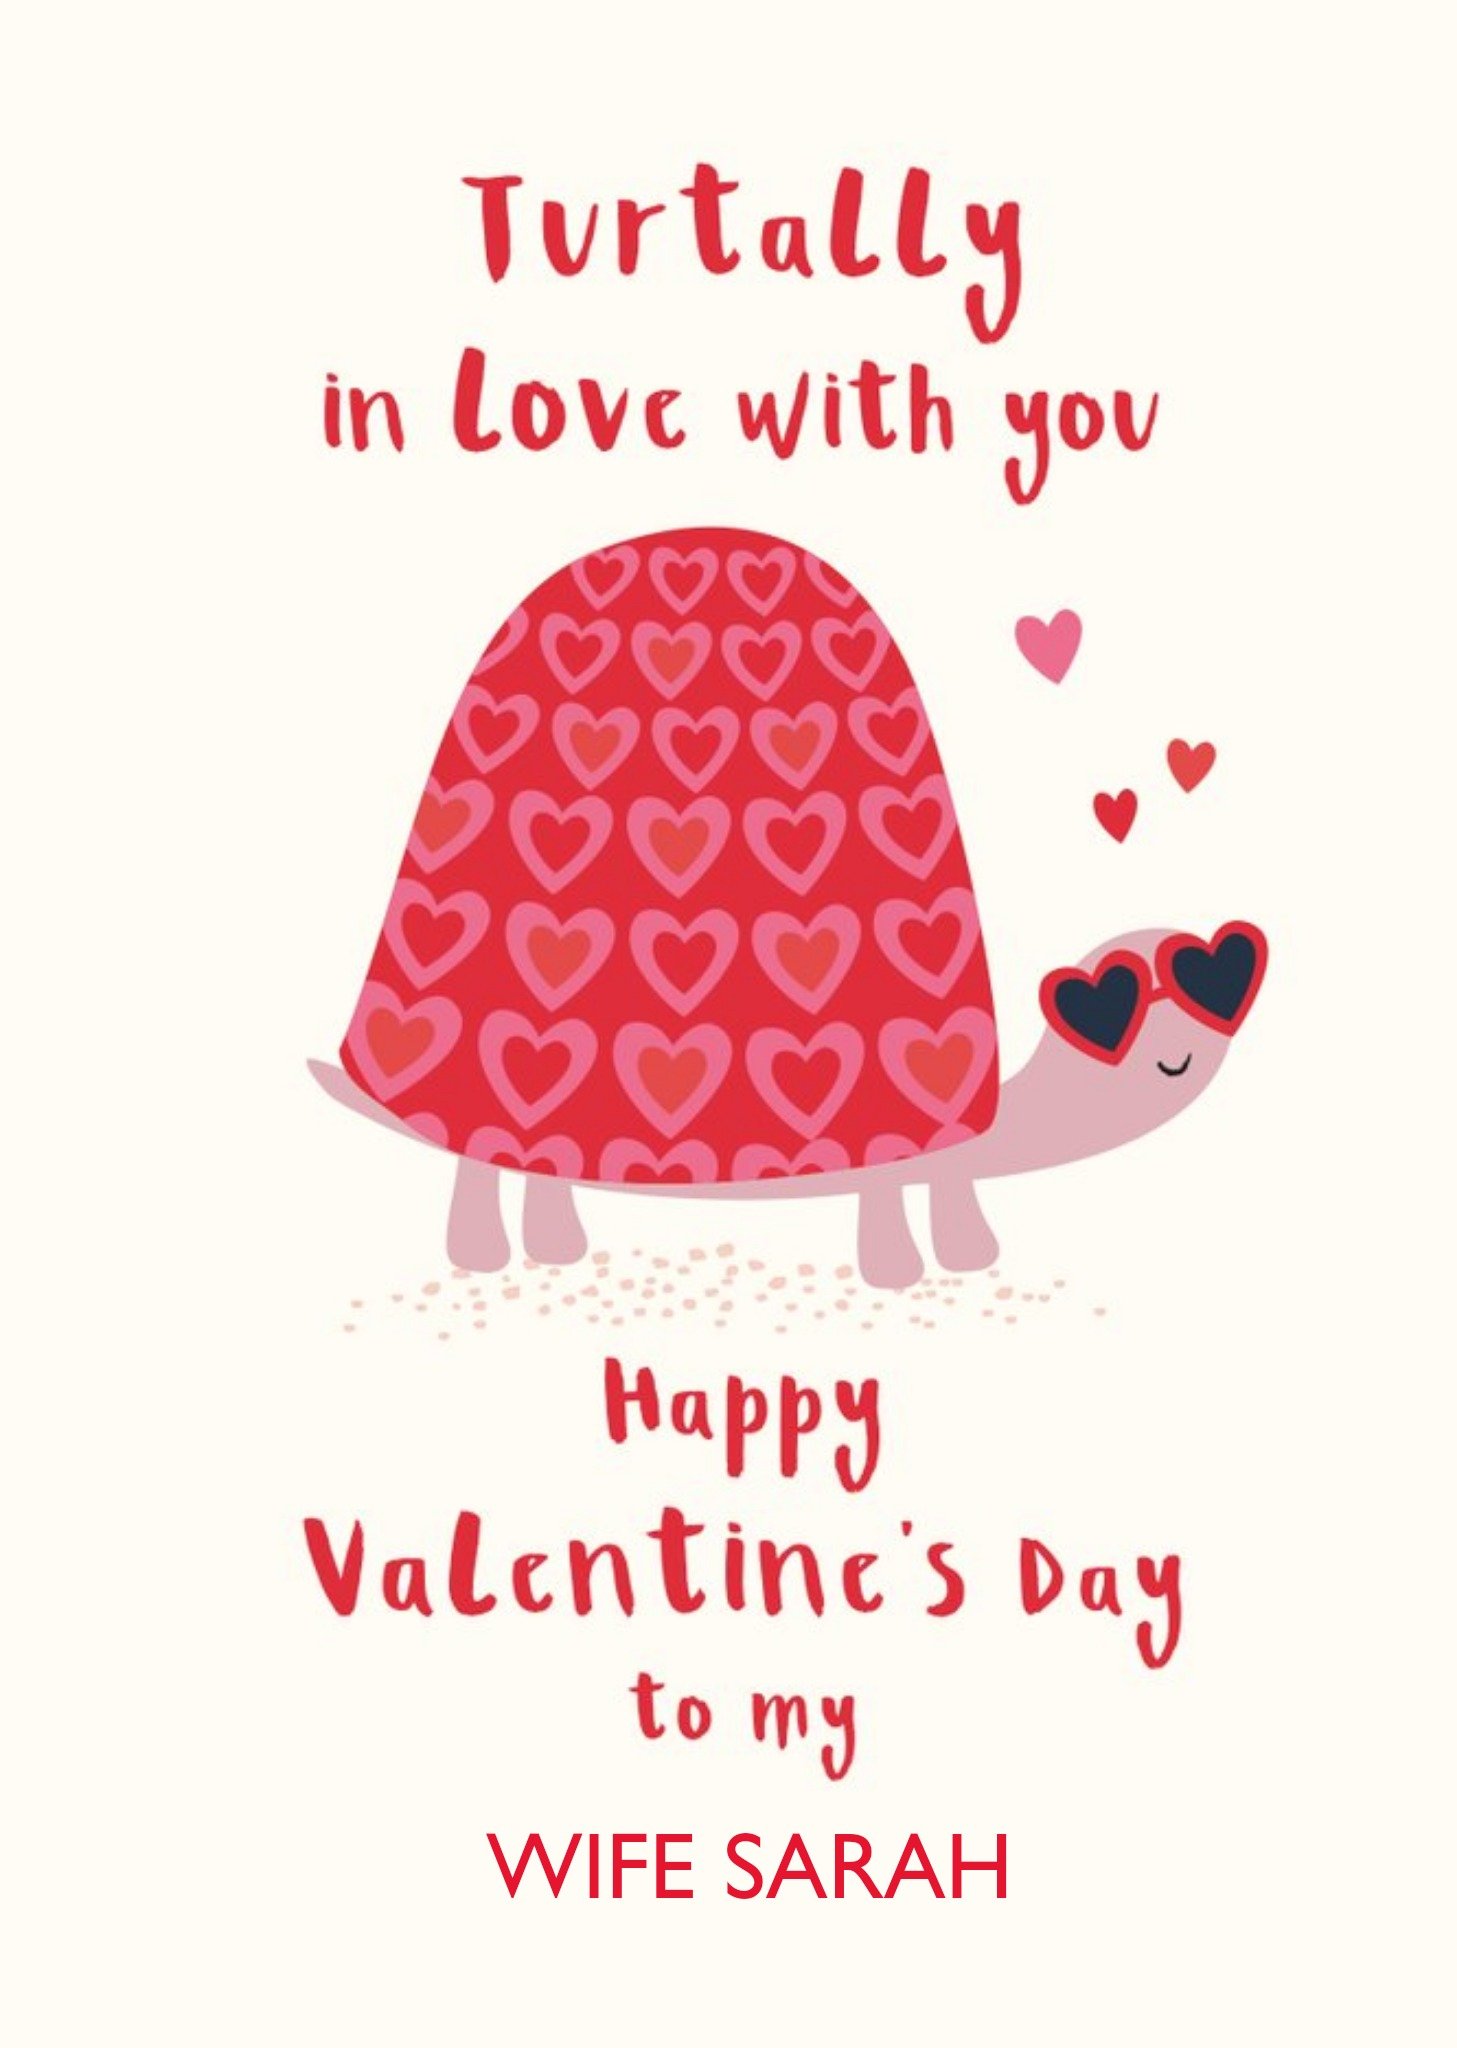 Moonpig Cute Illustration Of A Turtle Wearing Heart Shaped Shades Valentine's Day Card Ecard